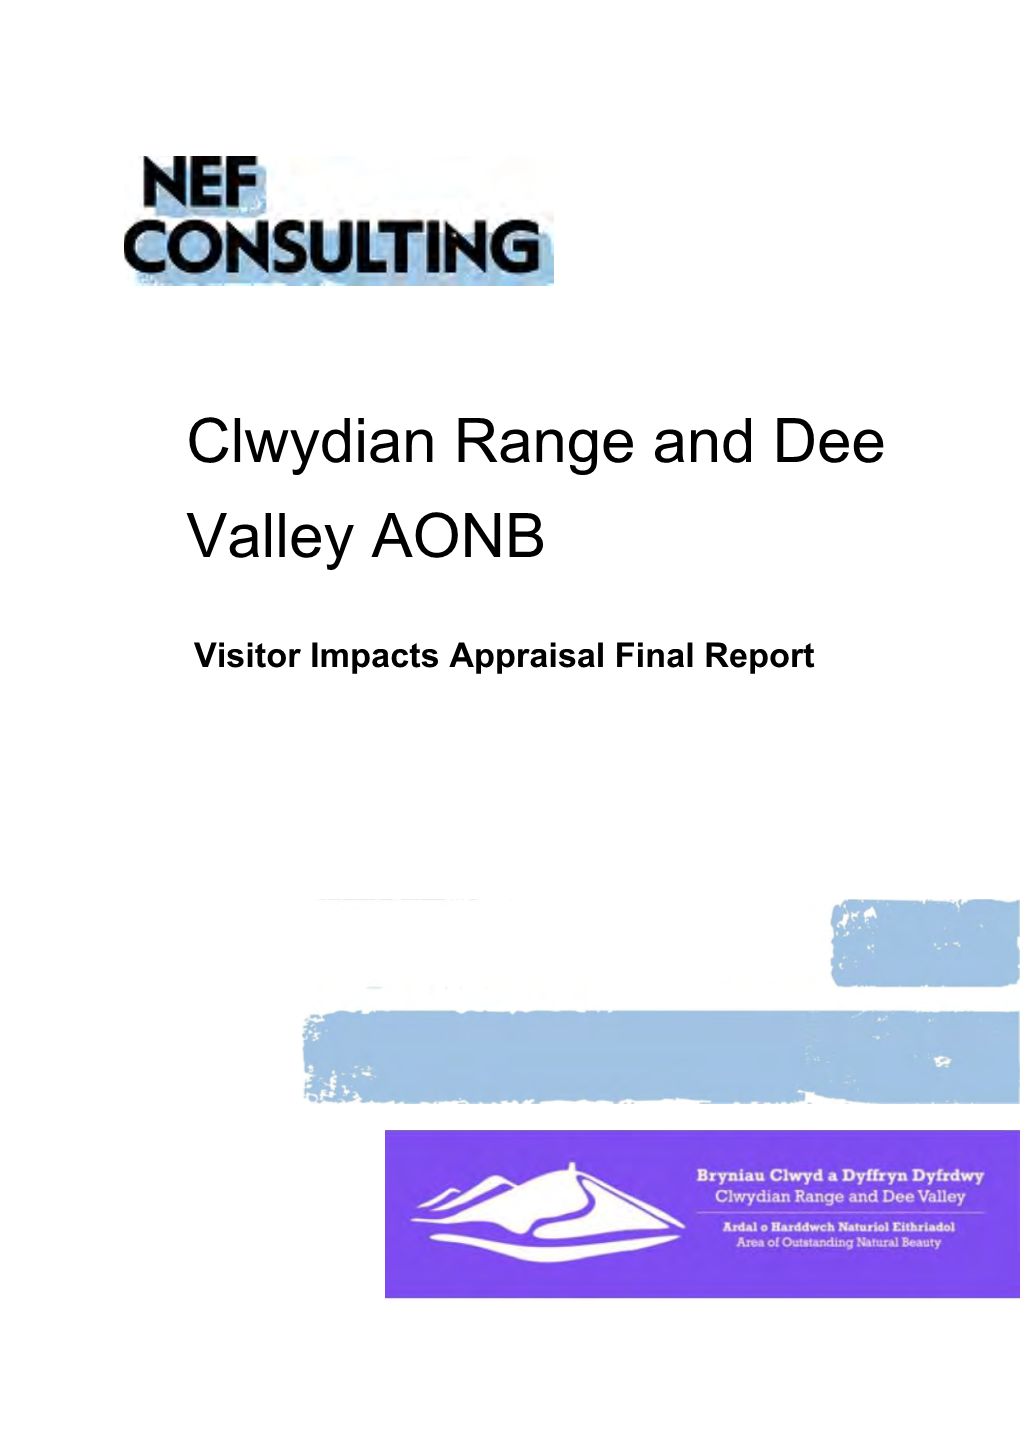 Clwydian Range and Dee Valley AONB – Visitor Impacts Appraisal Contents